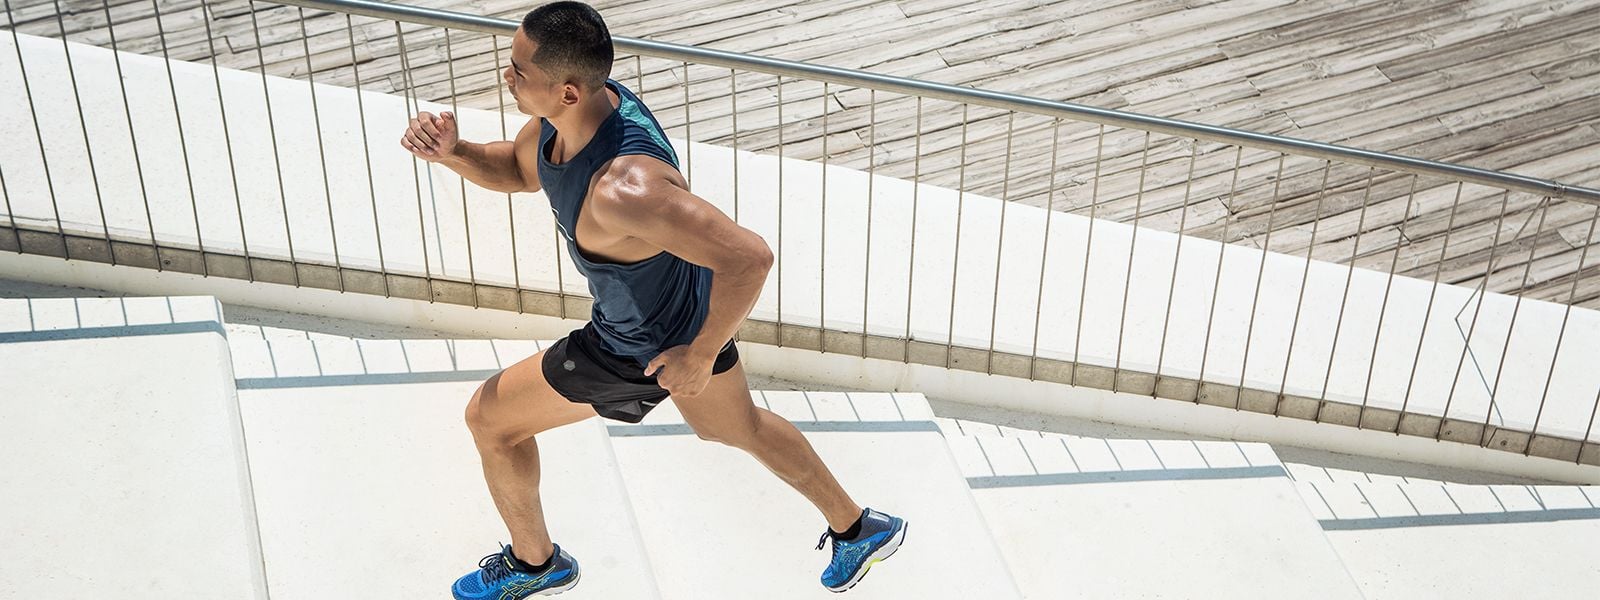 Speed Workouts - The Best Sprint Workouts for Beginners and Advanced Runners